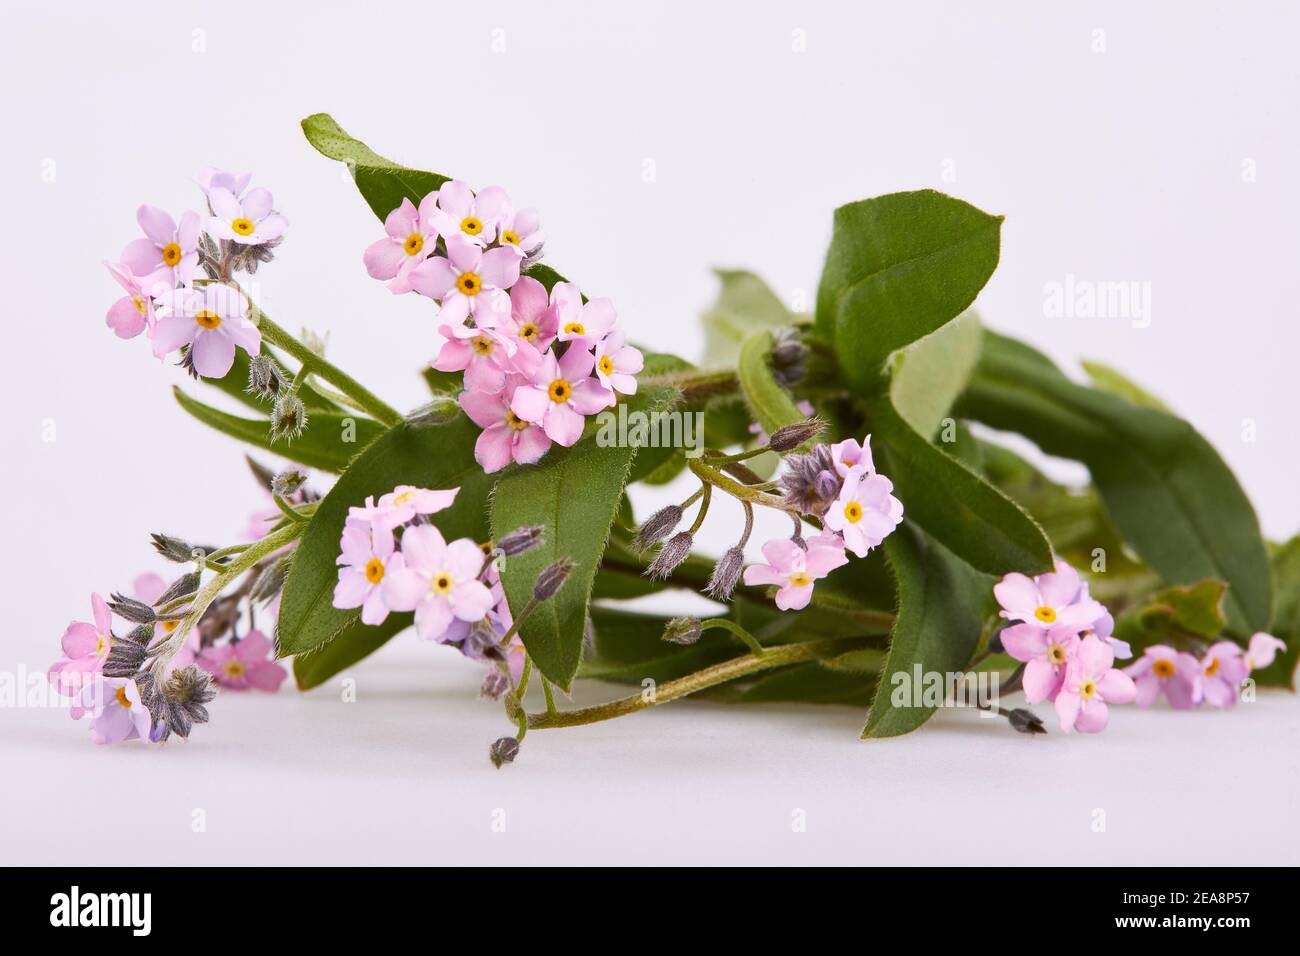 Bunch of small pink forget me not flowers (scorpion grasses, Myosotis) with leaves on  awhite background. Stock Photo